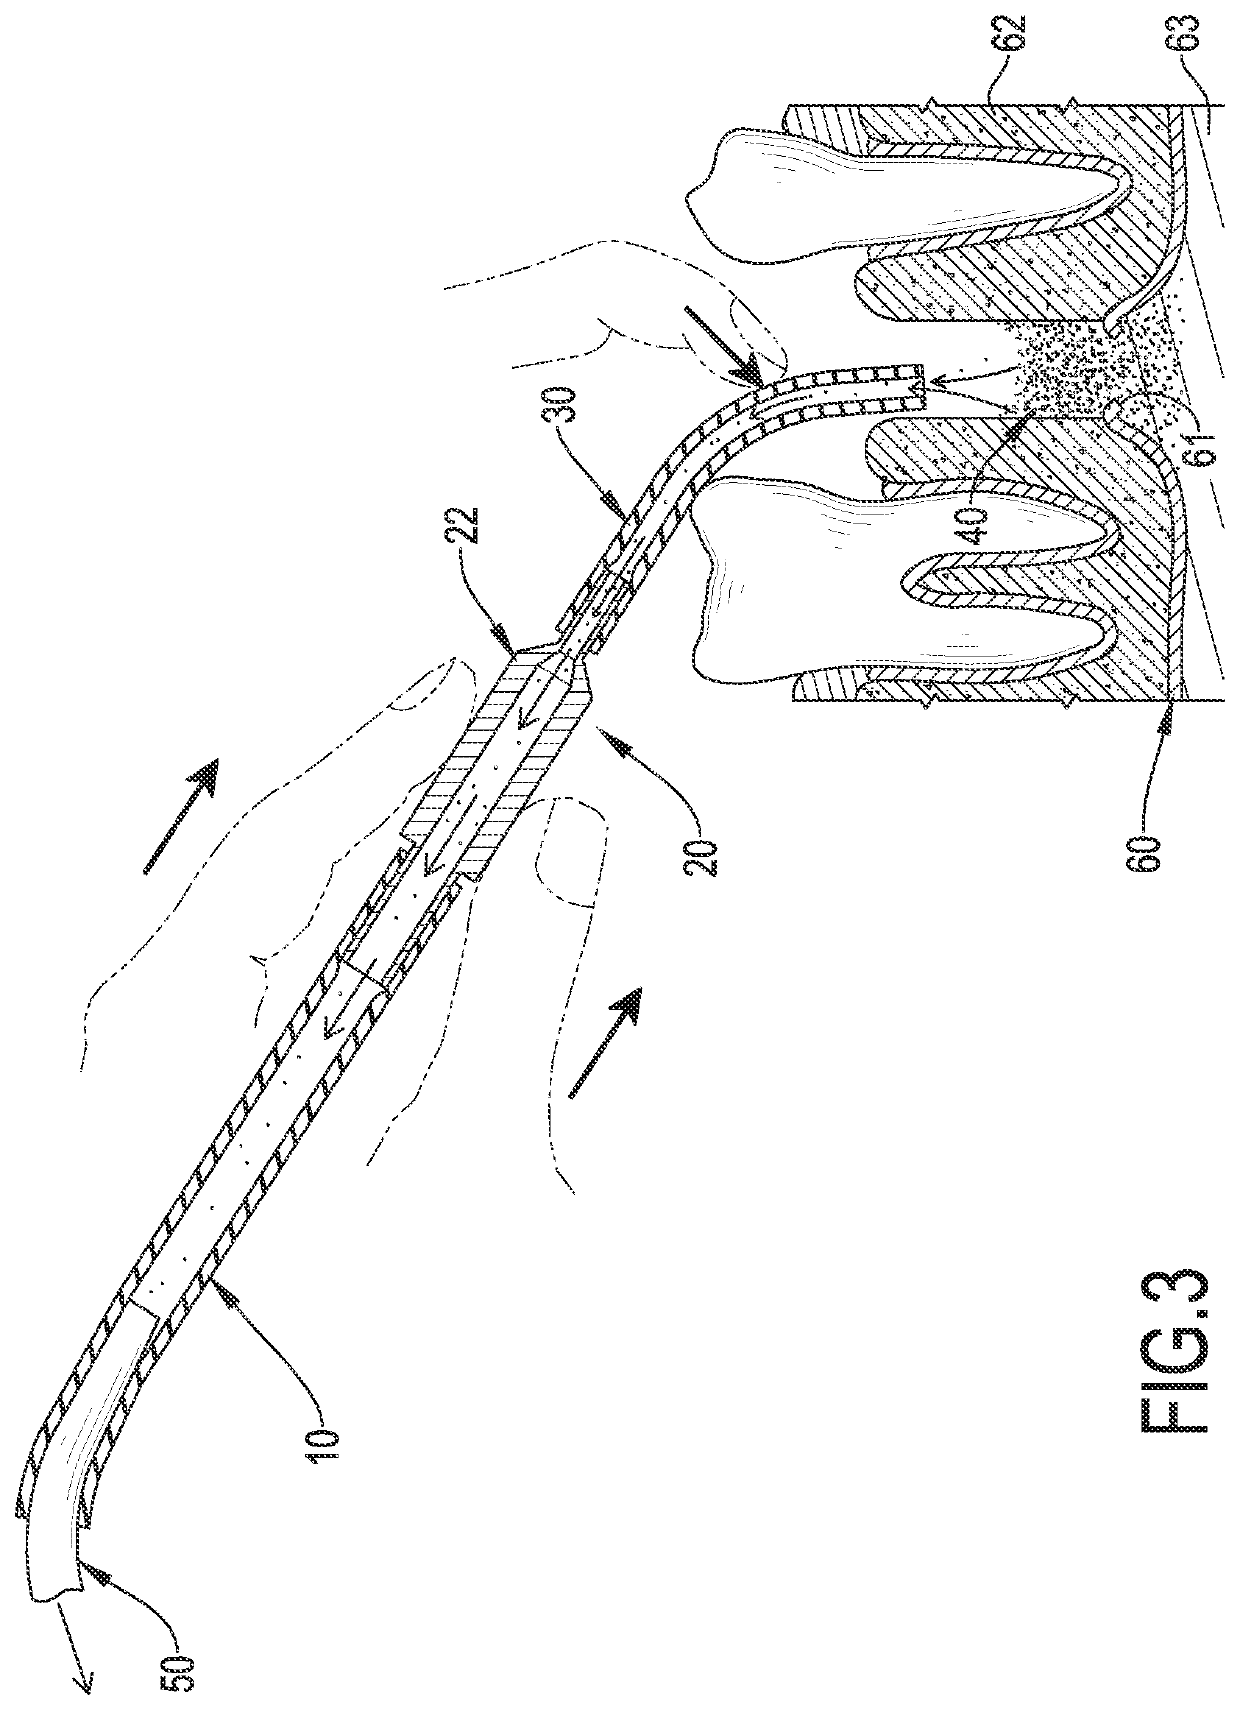 Removing Device for Dentistry